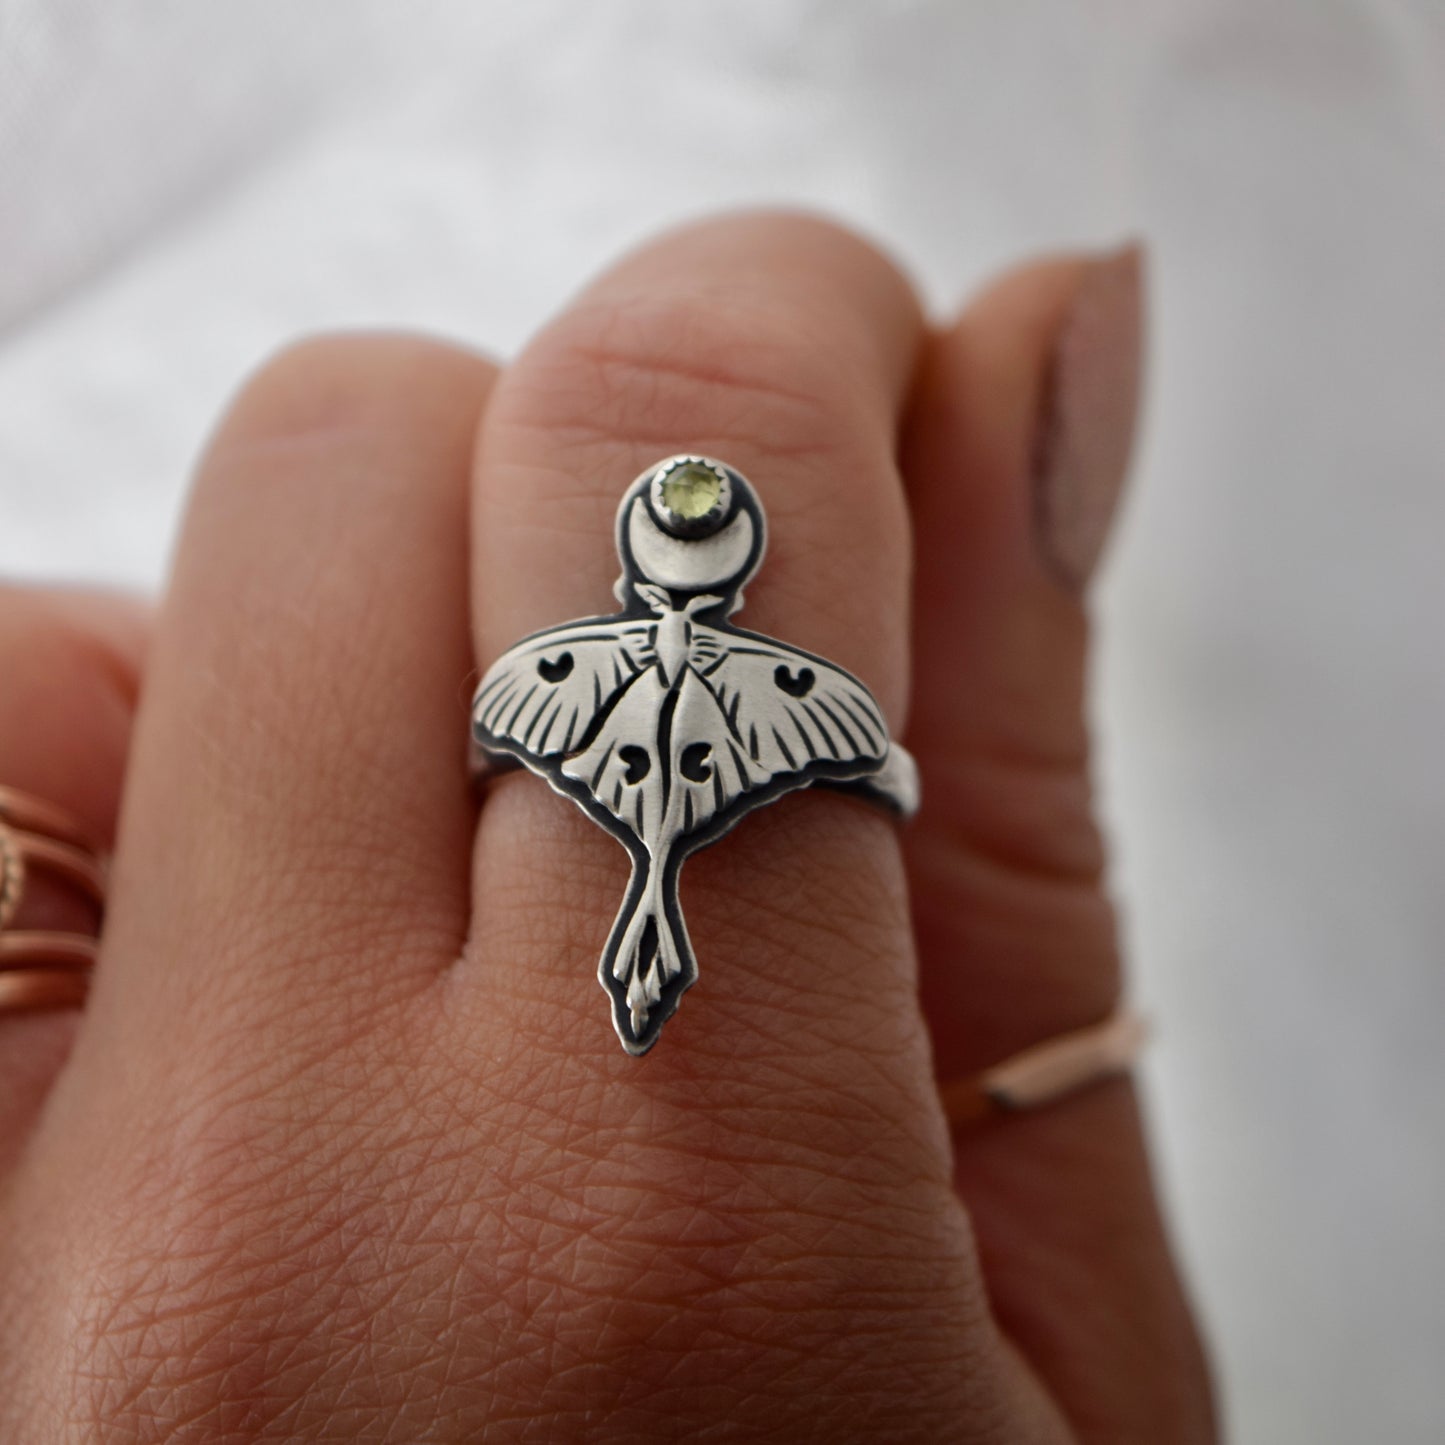 Luna Moth Ring with Peridot size 7